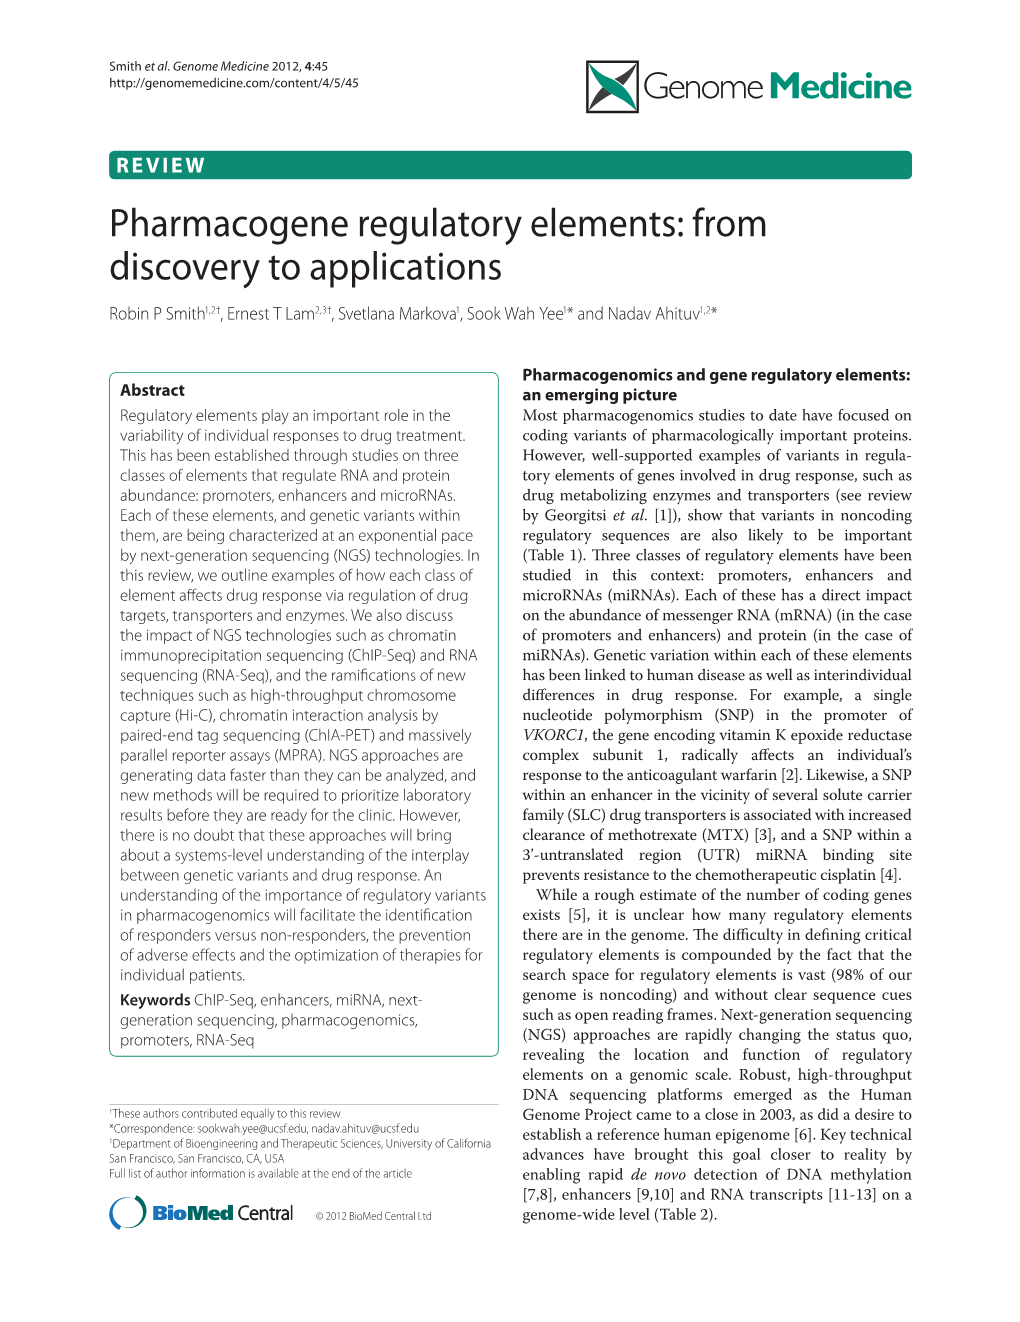 Pharmacogene Regulatory Elements: from Discovery to Applications